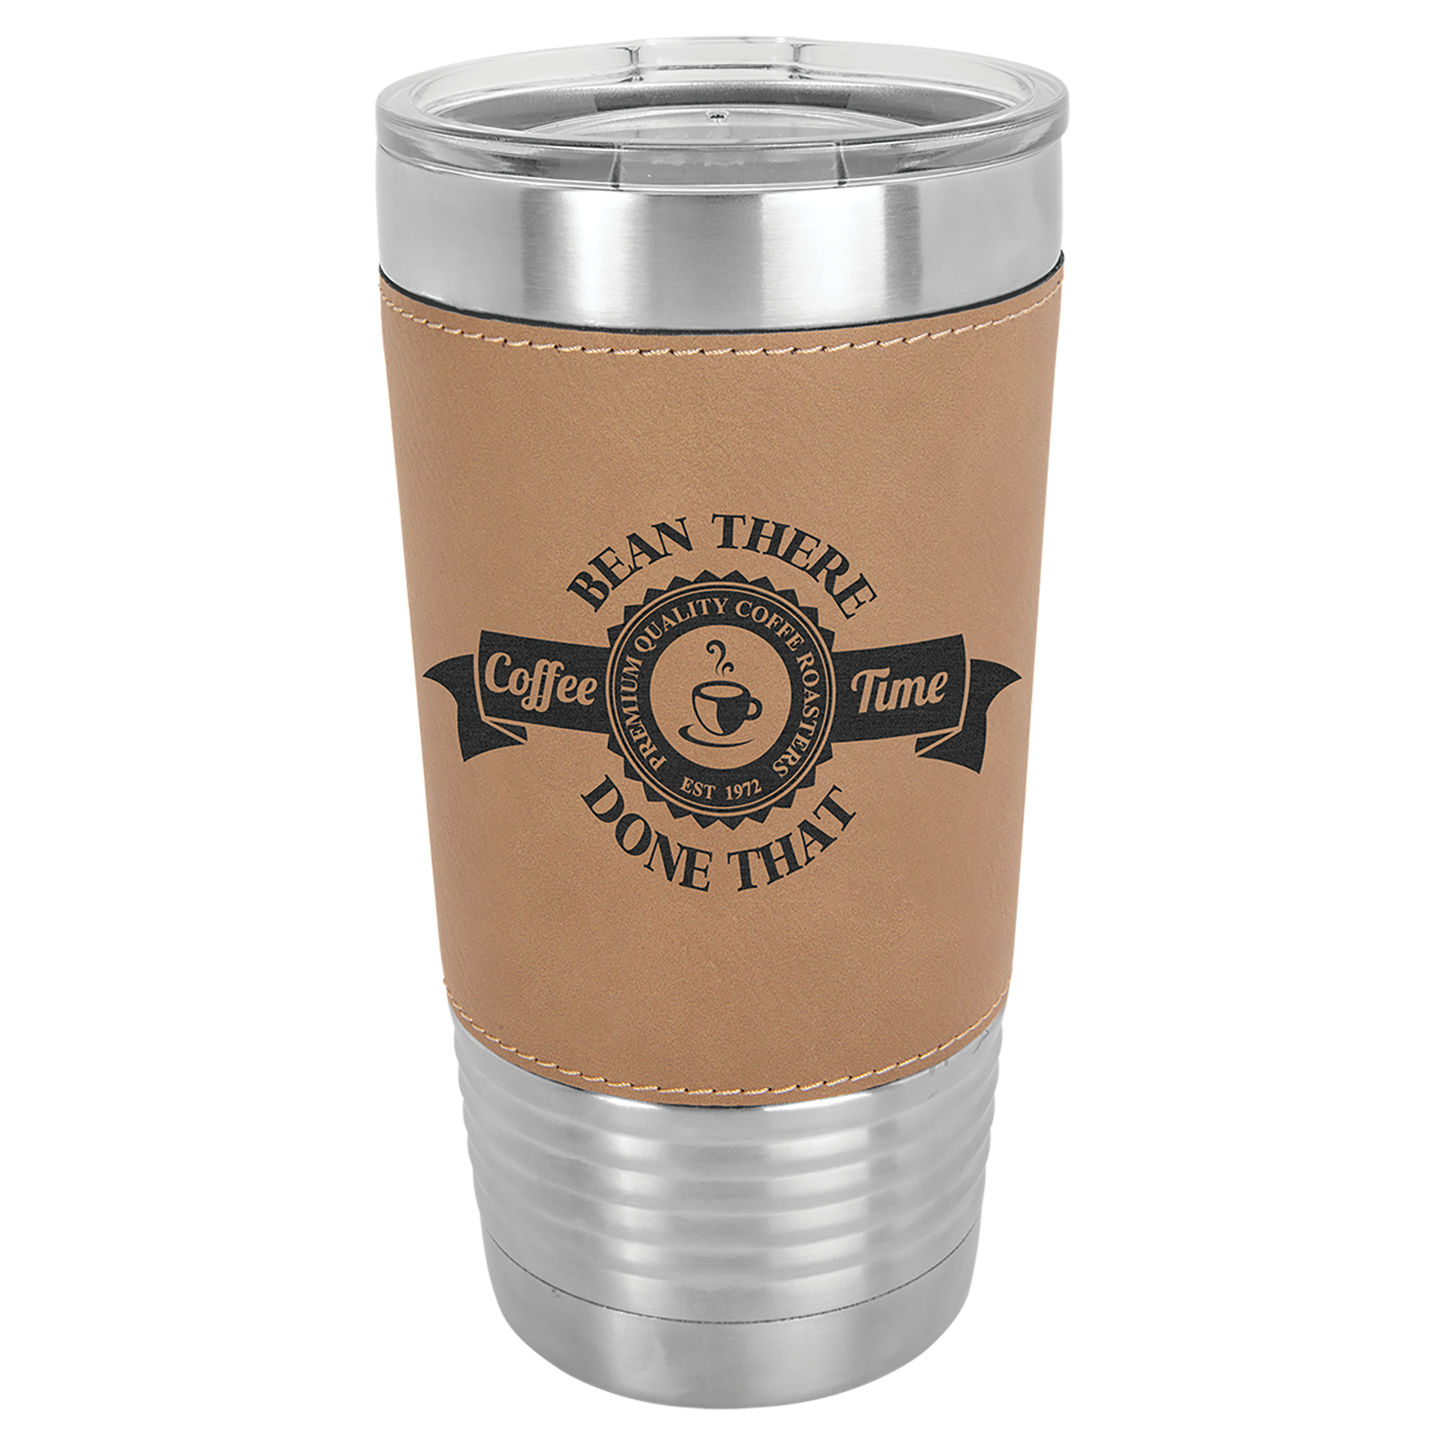 Customizable 20 oz Vegan Leather Grip Tumblers - Elevate Your Sips in Style